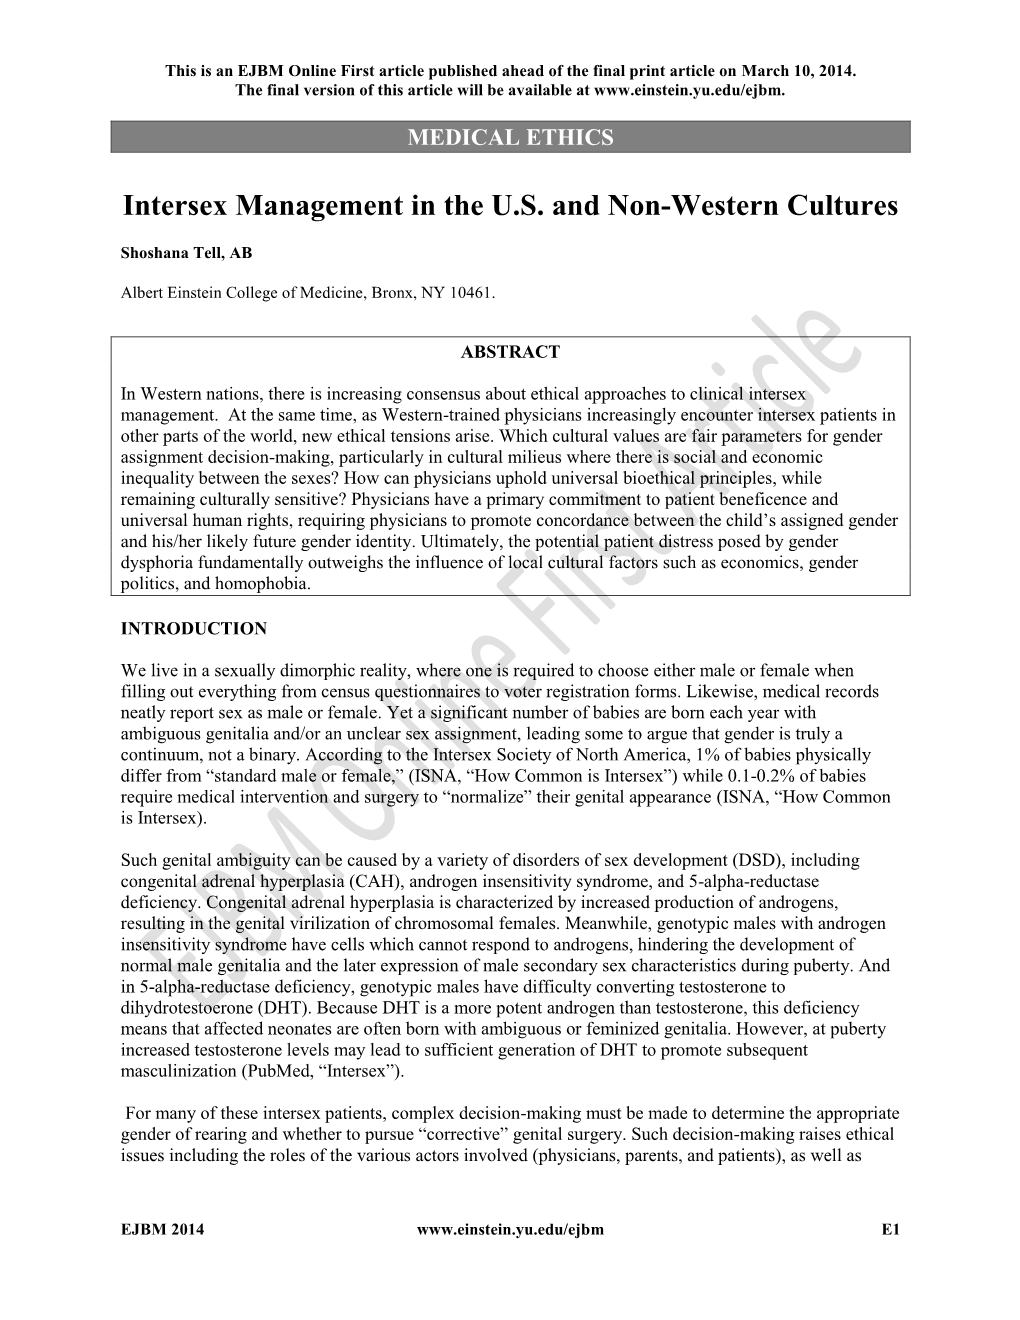 Intersex Management in the U.S. and Non-Western Cultures